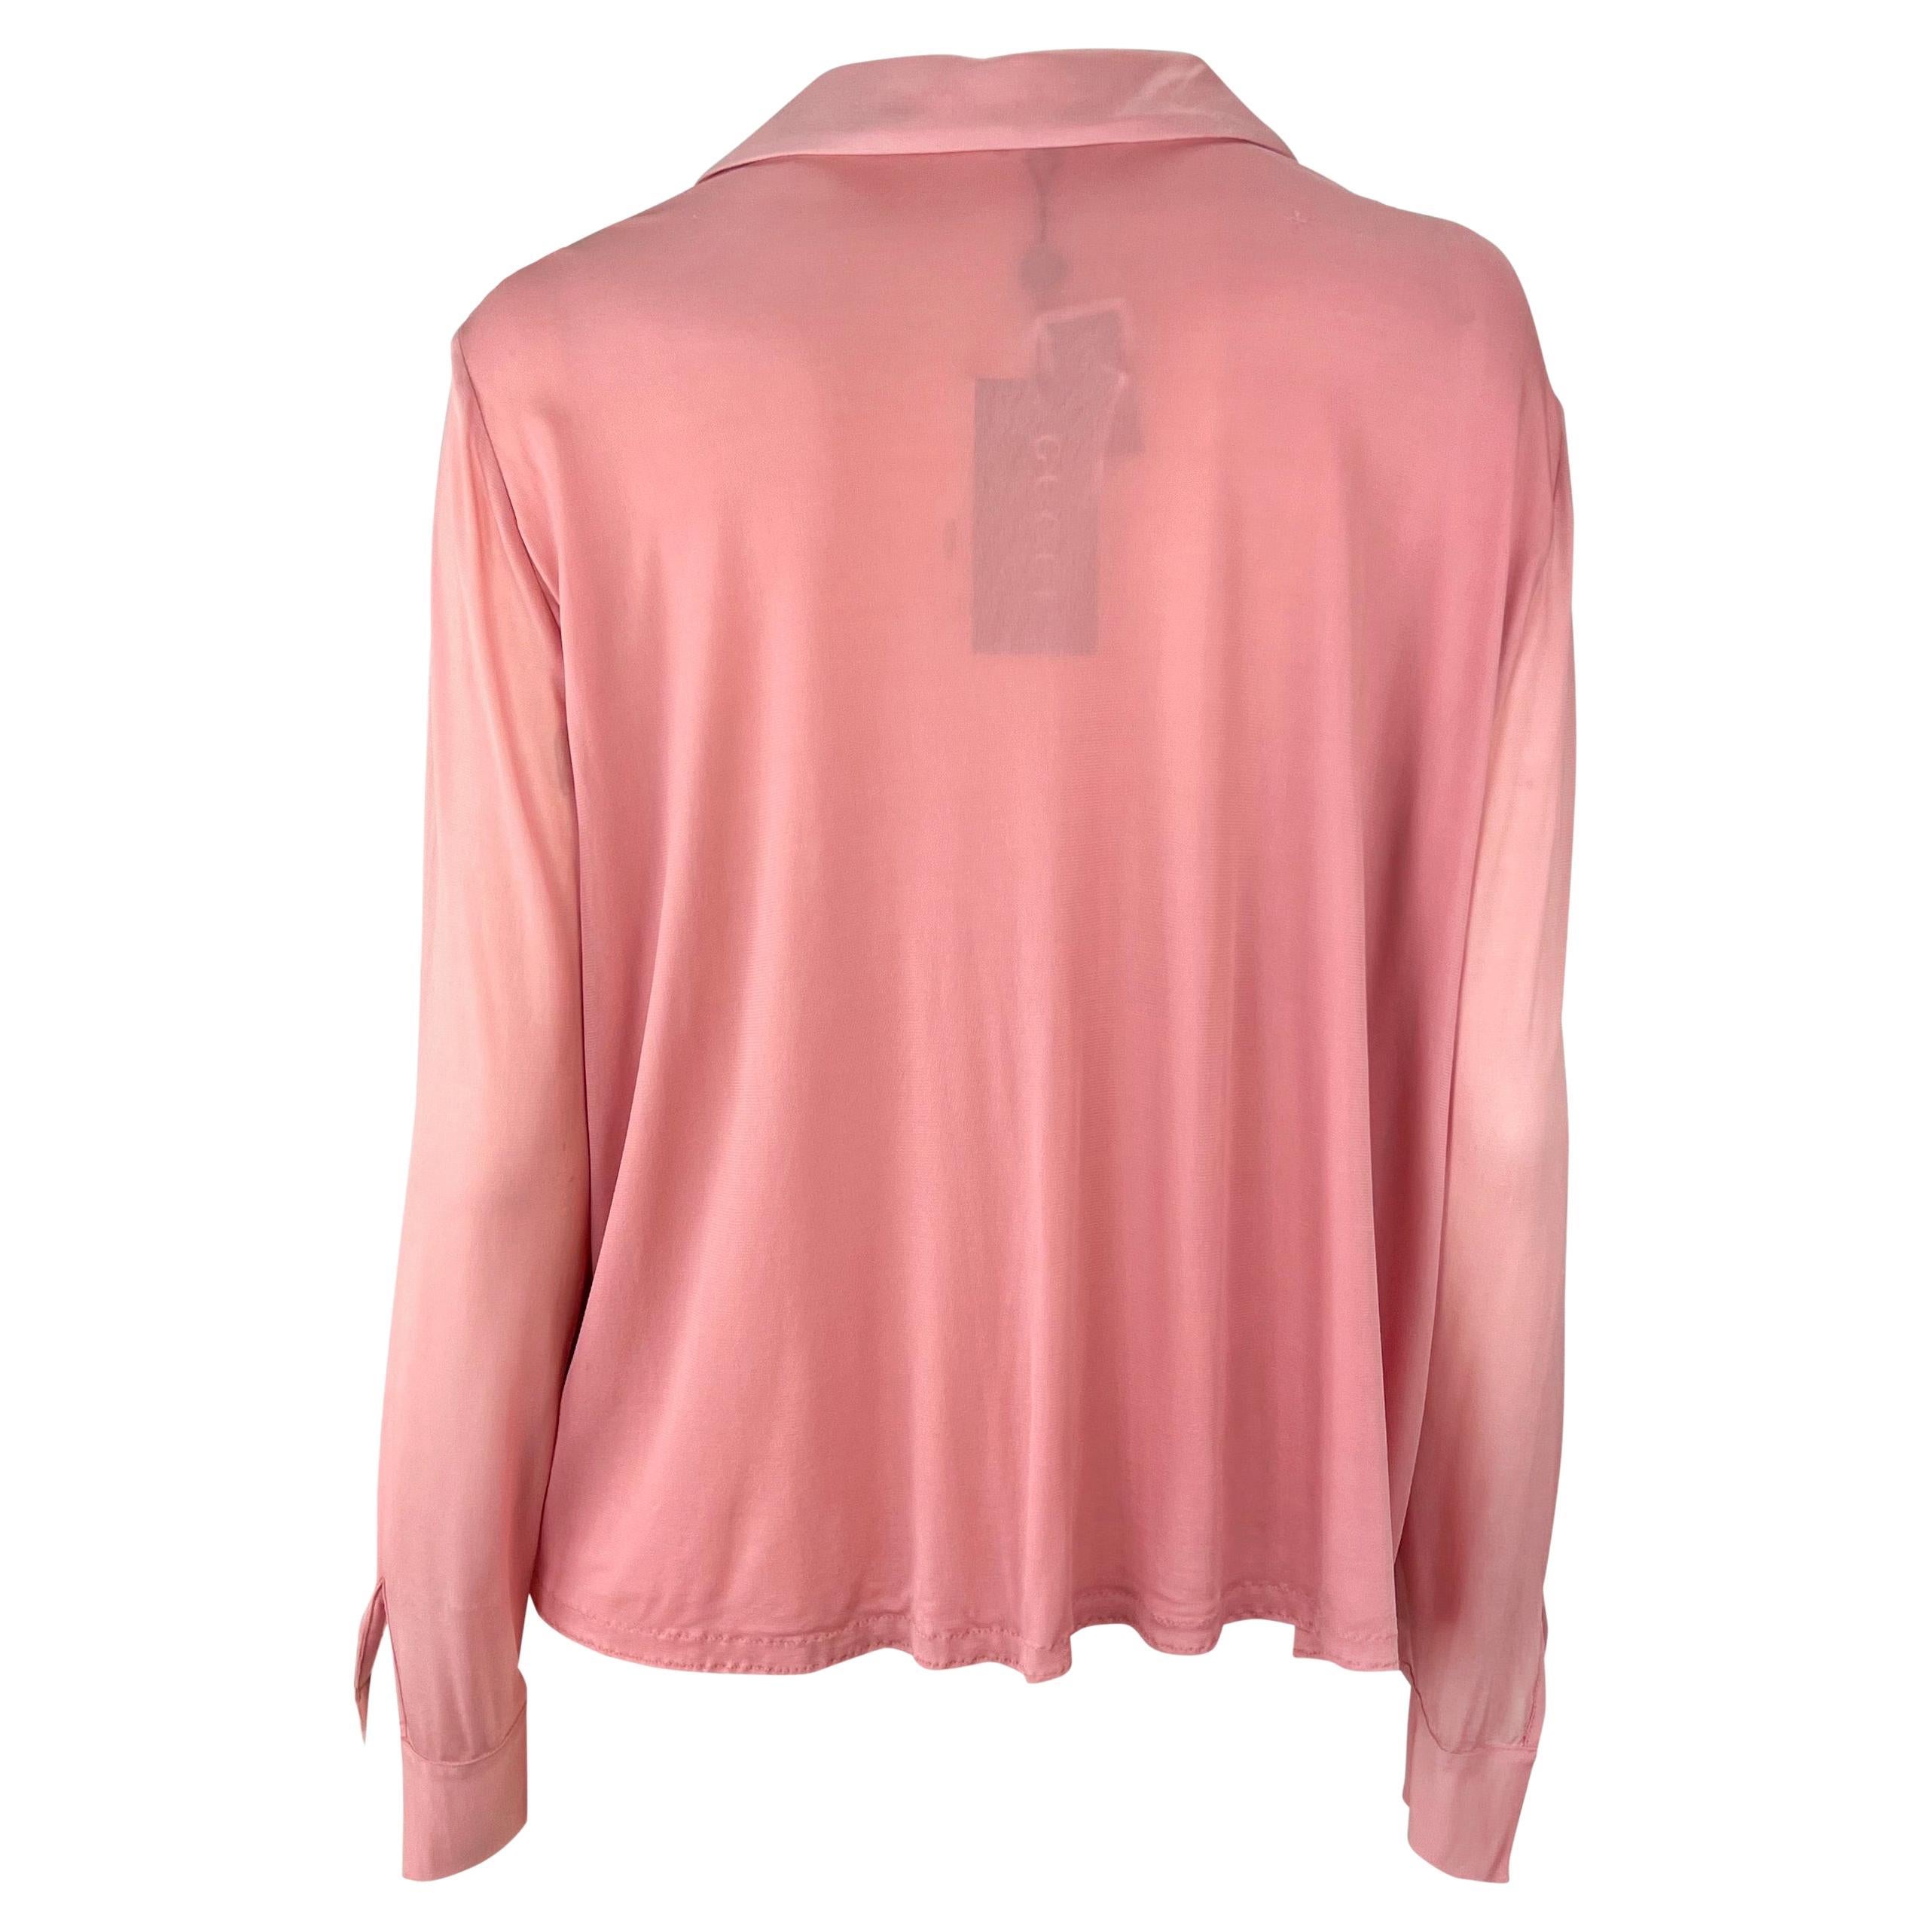 NWT S/S 2000 Gucci by Tom Ford Runway Ad Plunging Pink Collared Blouse Top For Sale 5